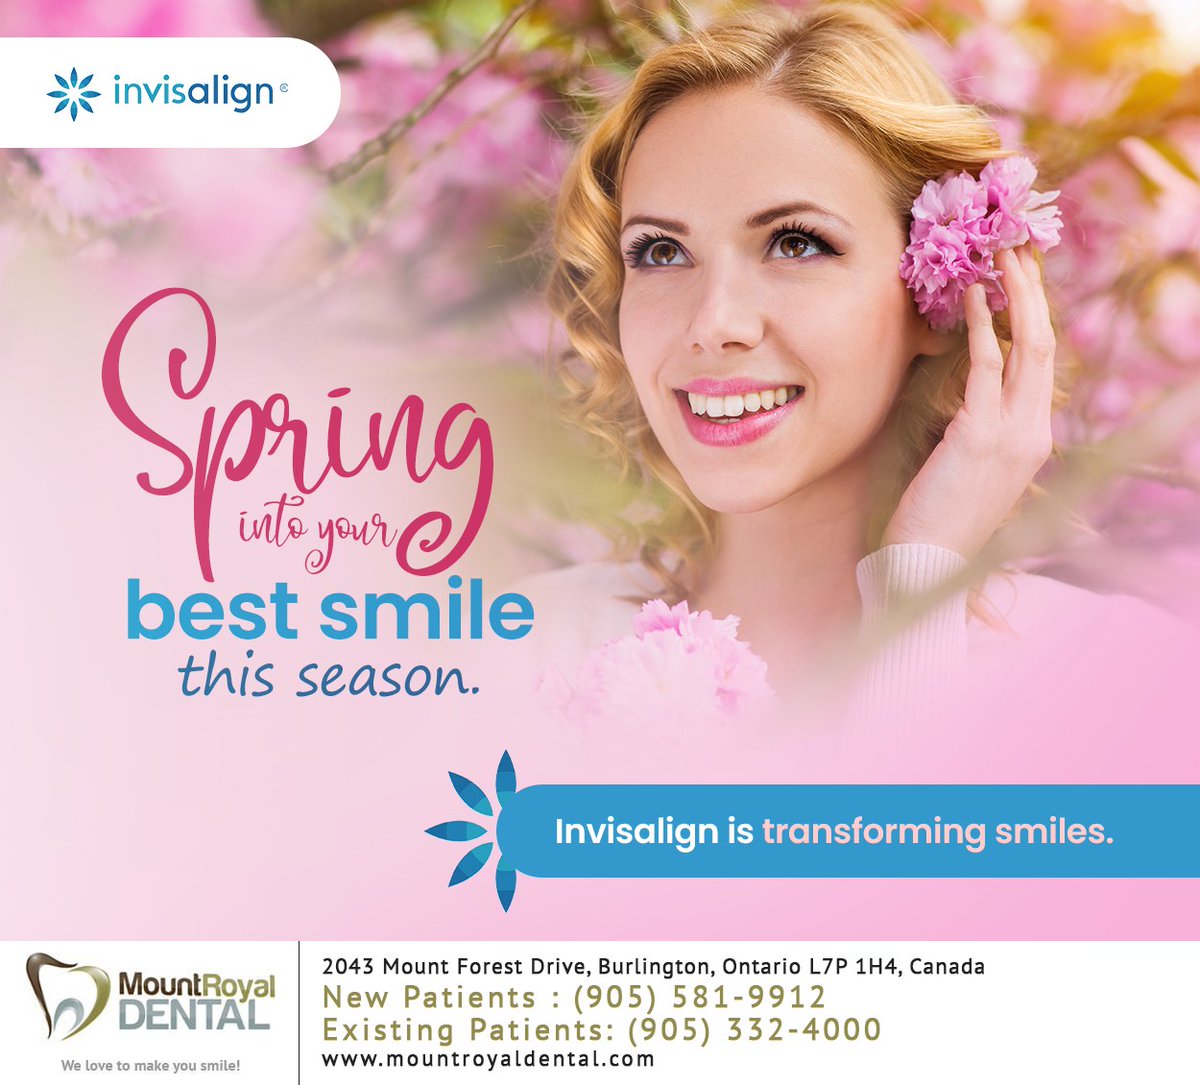 Prepare for your best smile this season with Invisalign. Call us at (905) 581-9912 / (905) 332-4000 to schedule a consultation with our team to determine if this treatment will suit your unique needs. #invisalign #transformingsmiles #burlington #ON #mountroyaldental